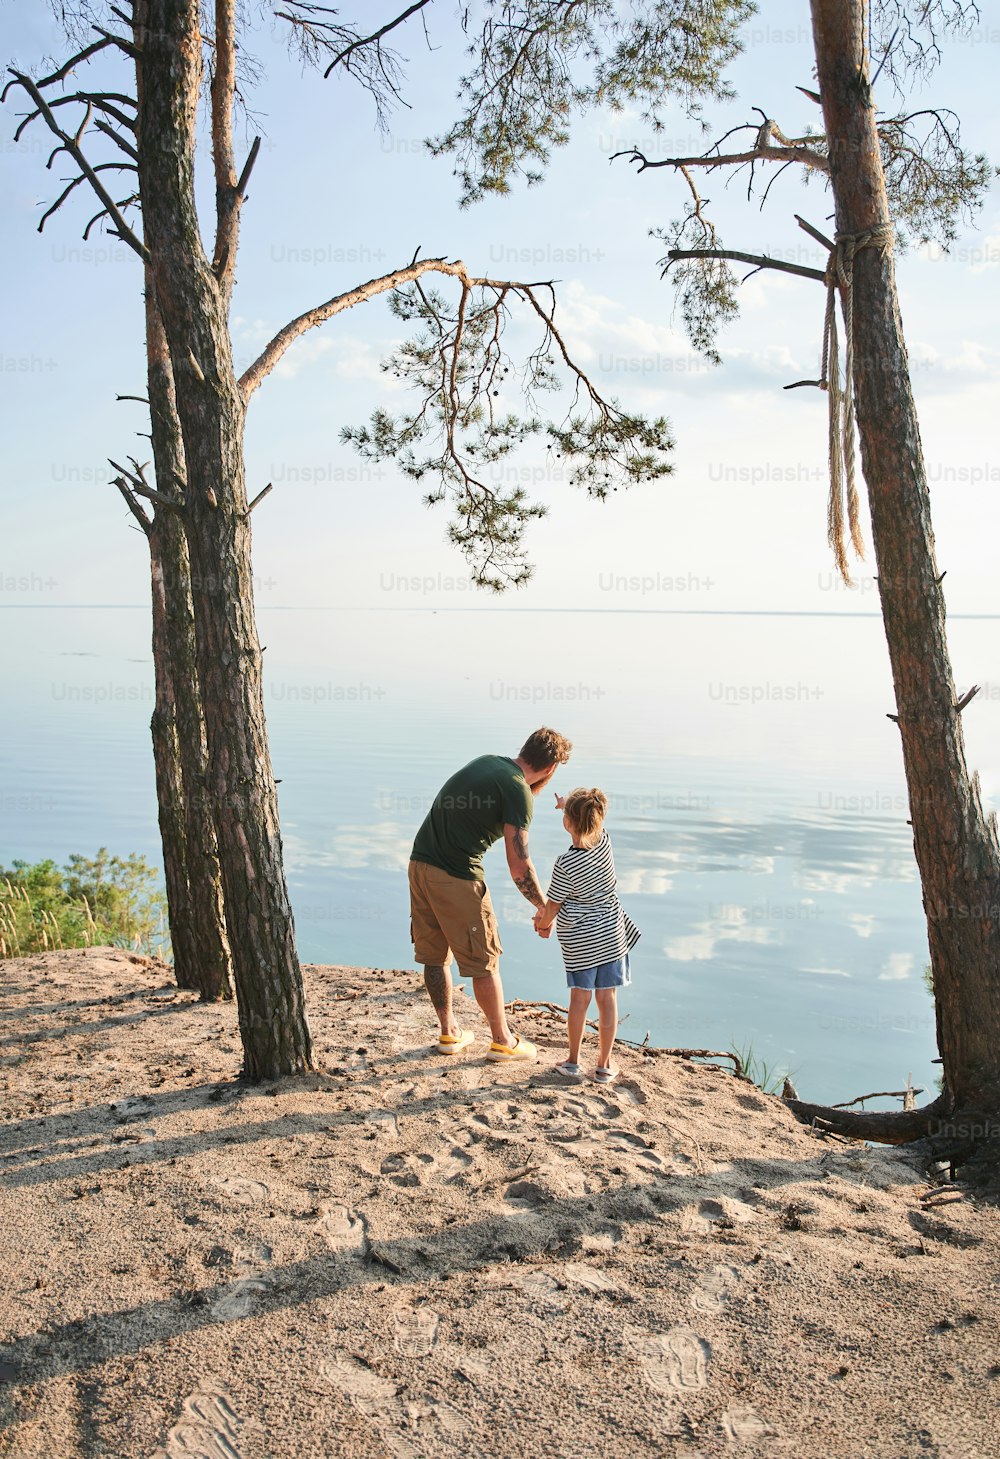 Vertical view of the young father spending time with cute child at the forest. Girl pointing at the distance. Family relation concept